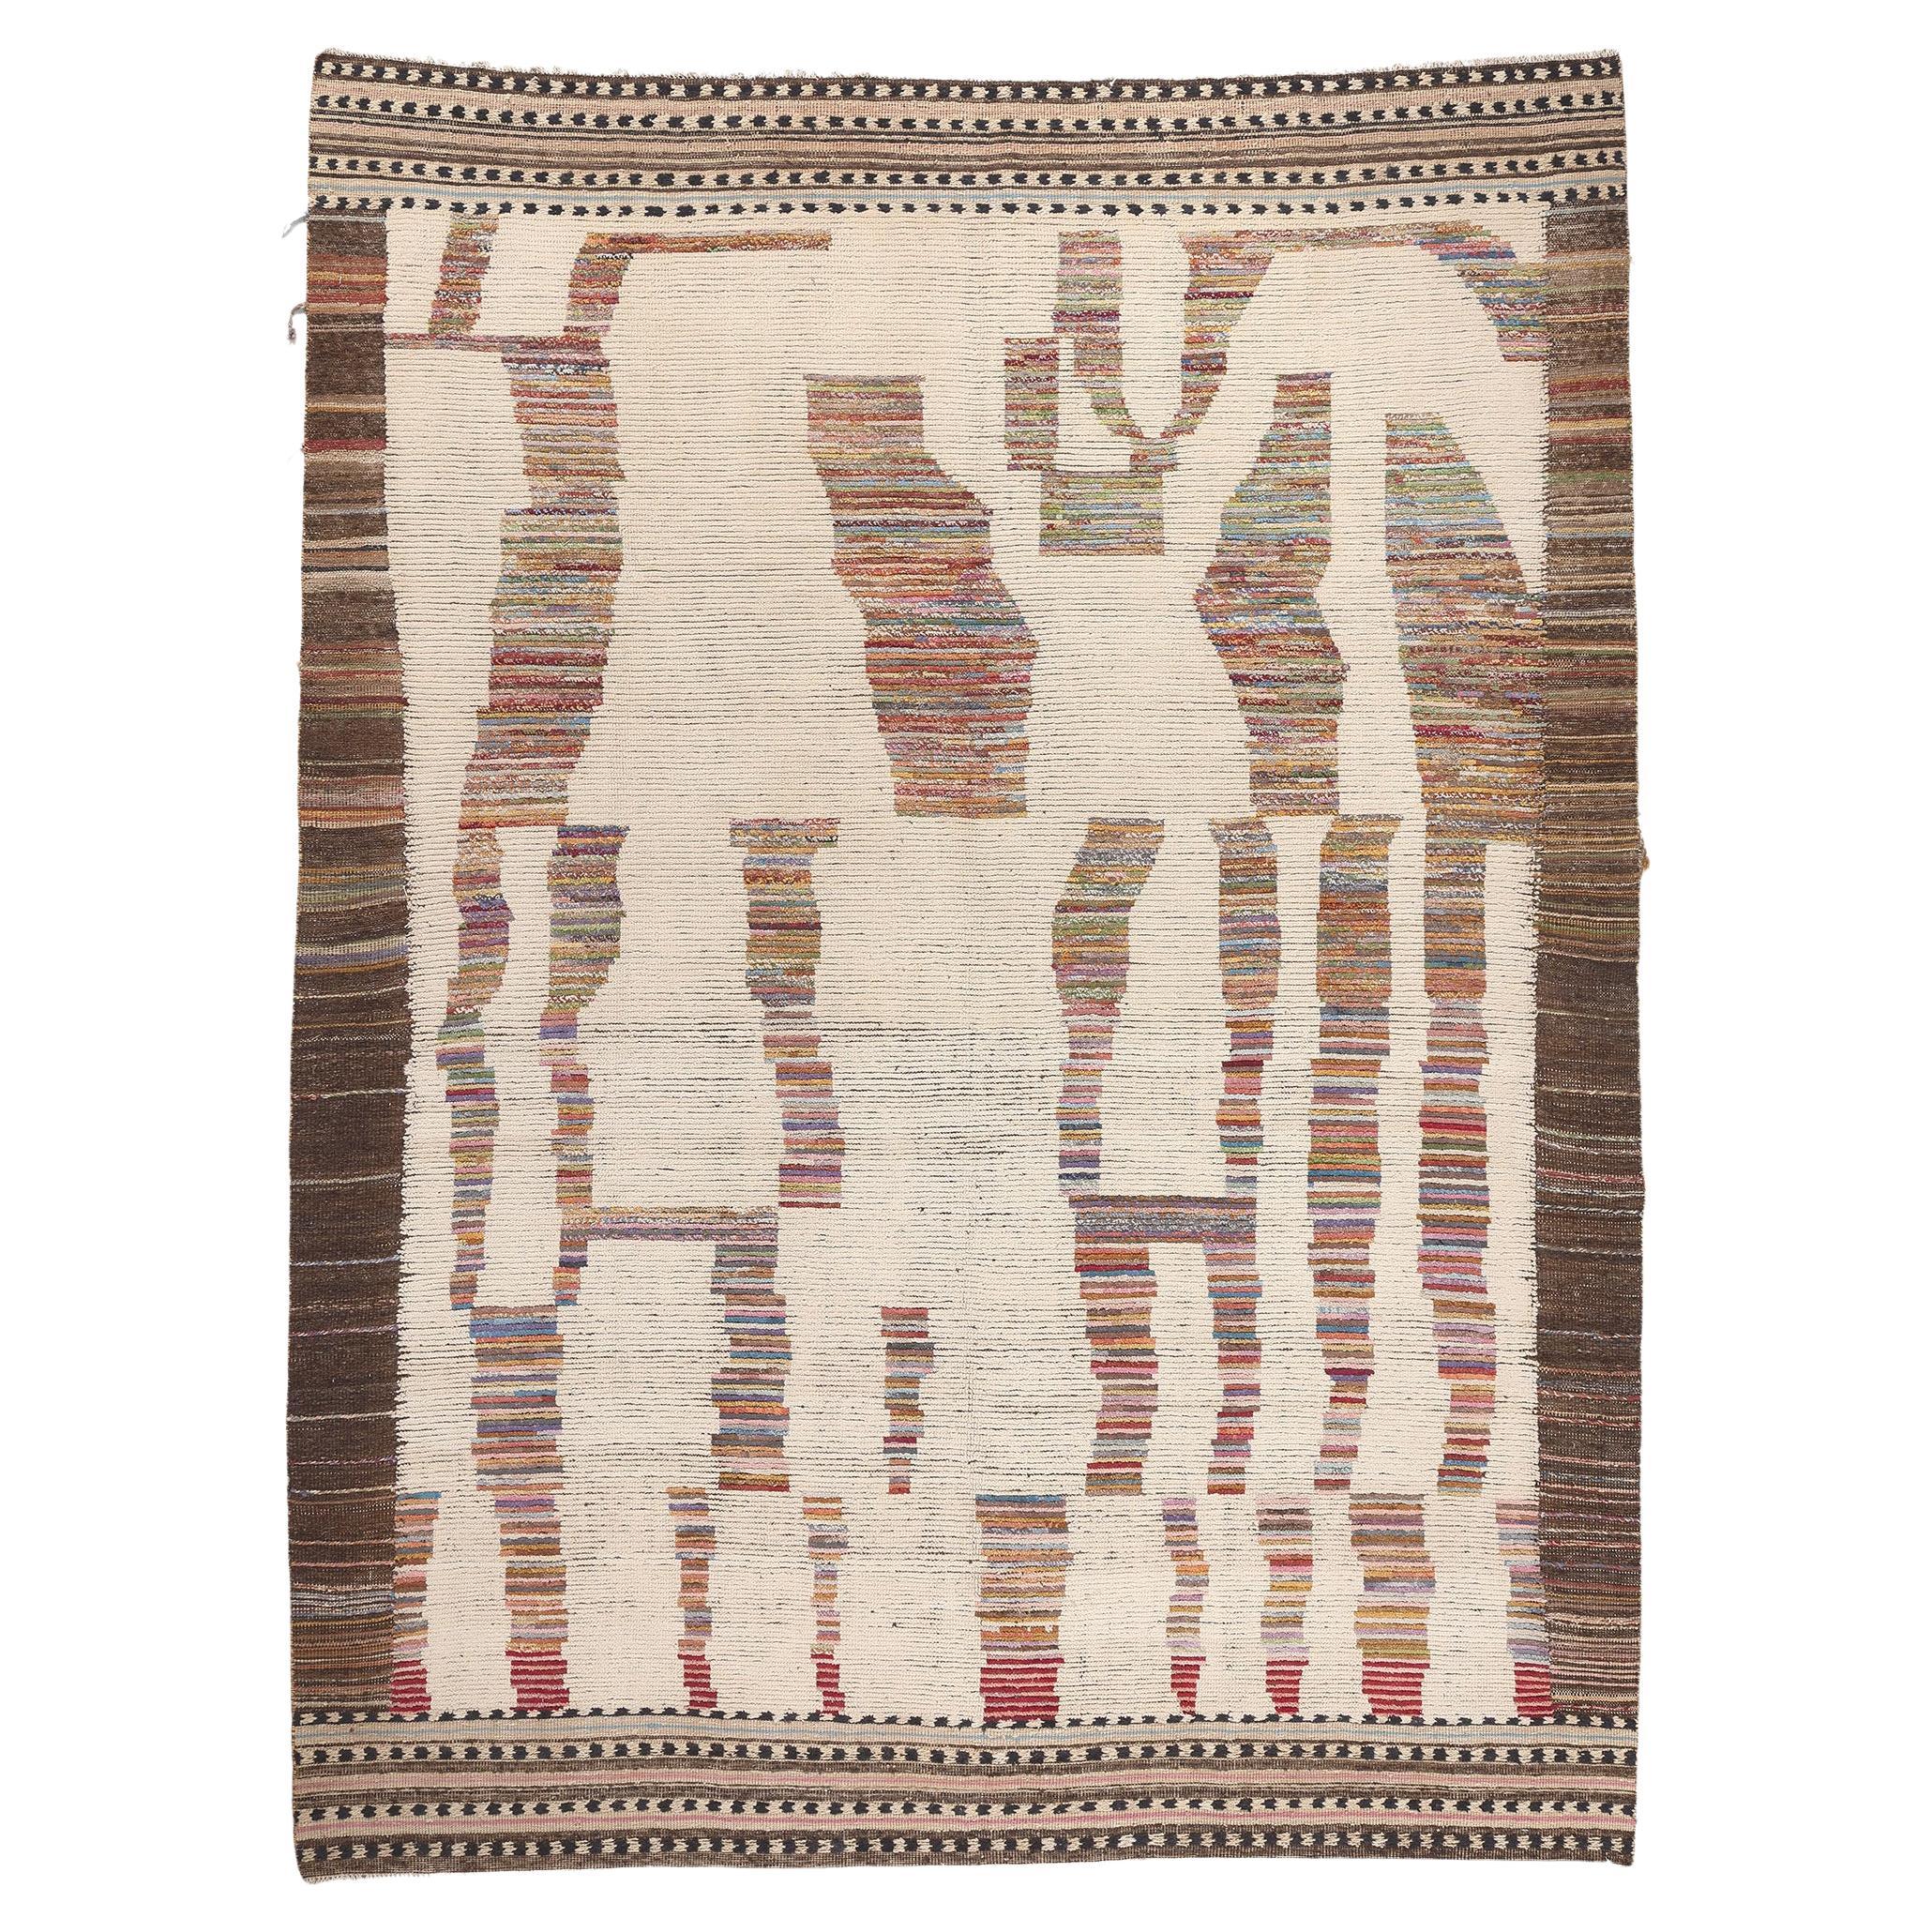 Large Modern Moroccan Area Rug with Short Pile and Earth-Tone Colors